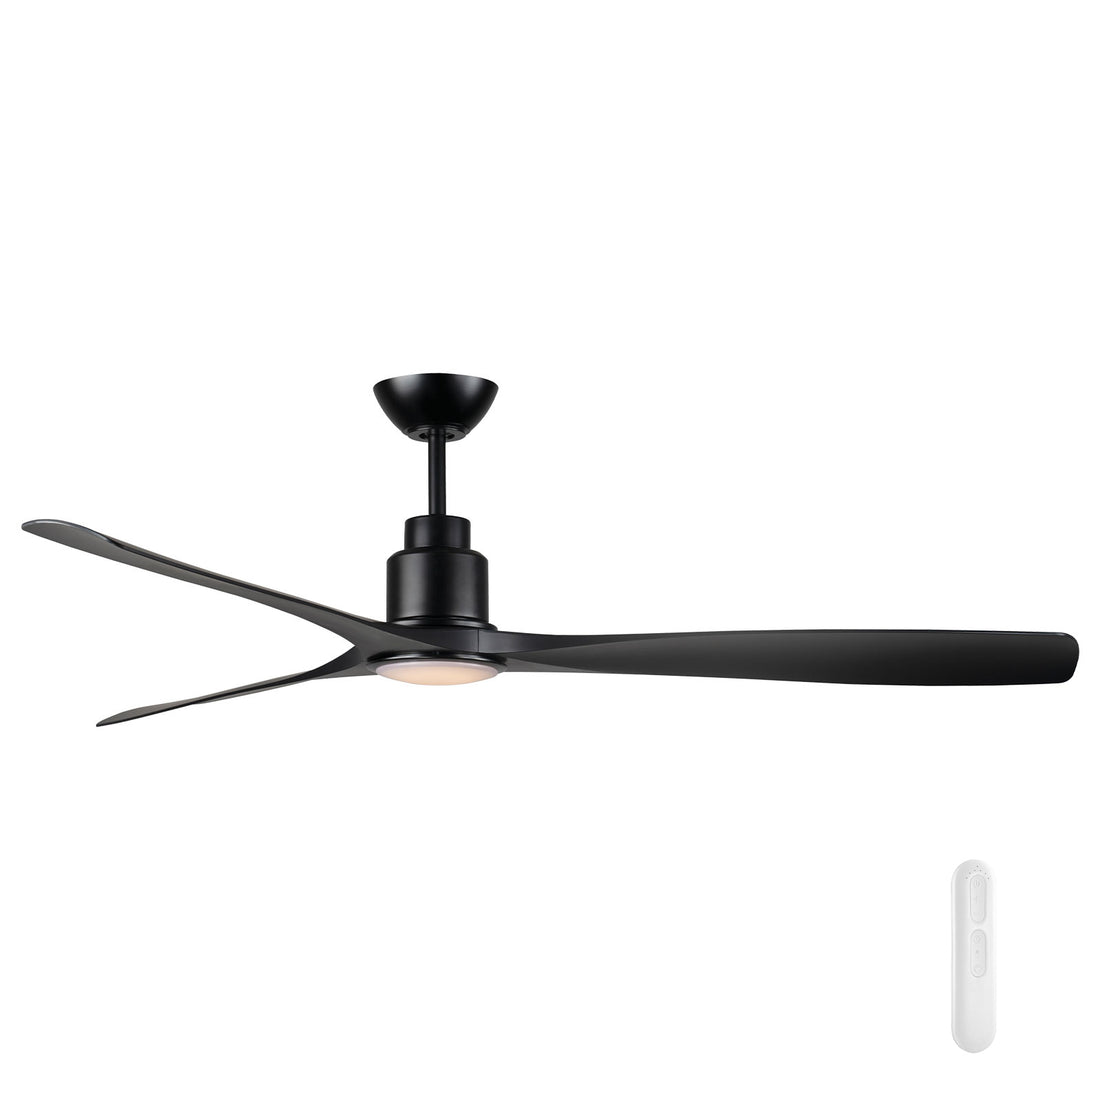 Iceman 152cm DC Ceiling Fan with Remote and LED Light